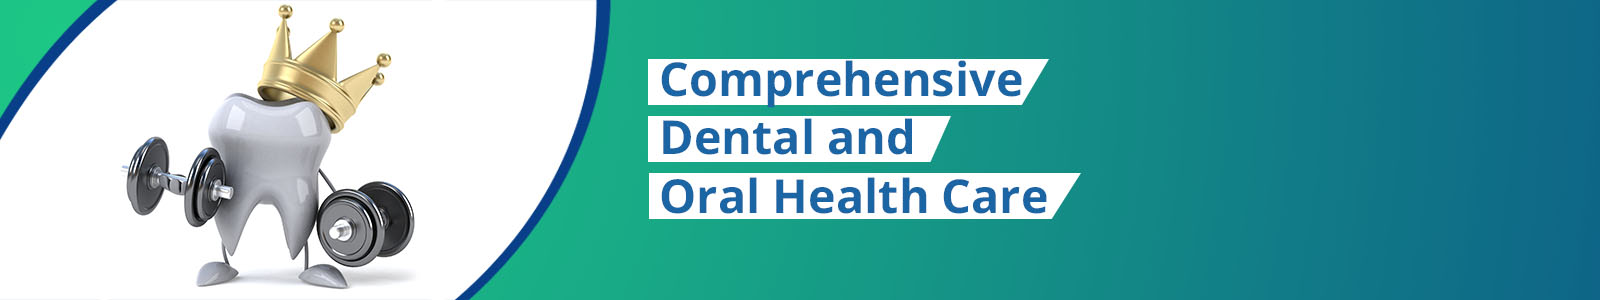 dental and oral healthcare